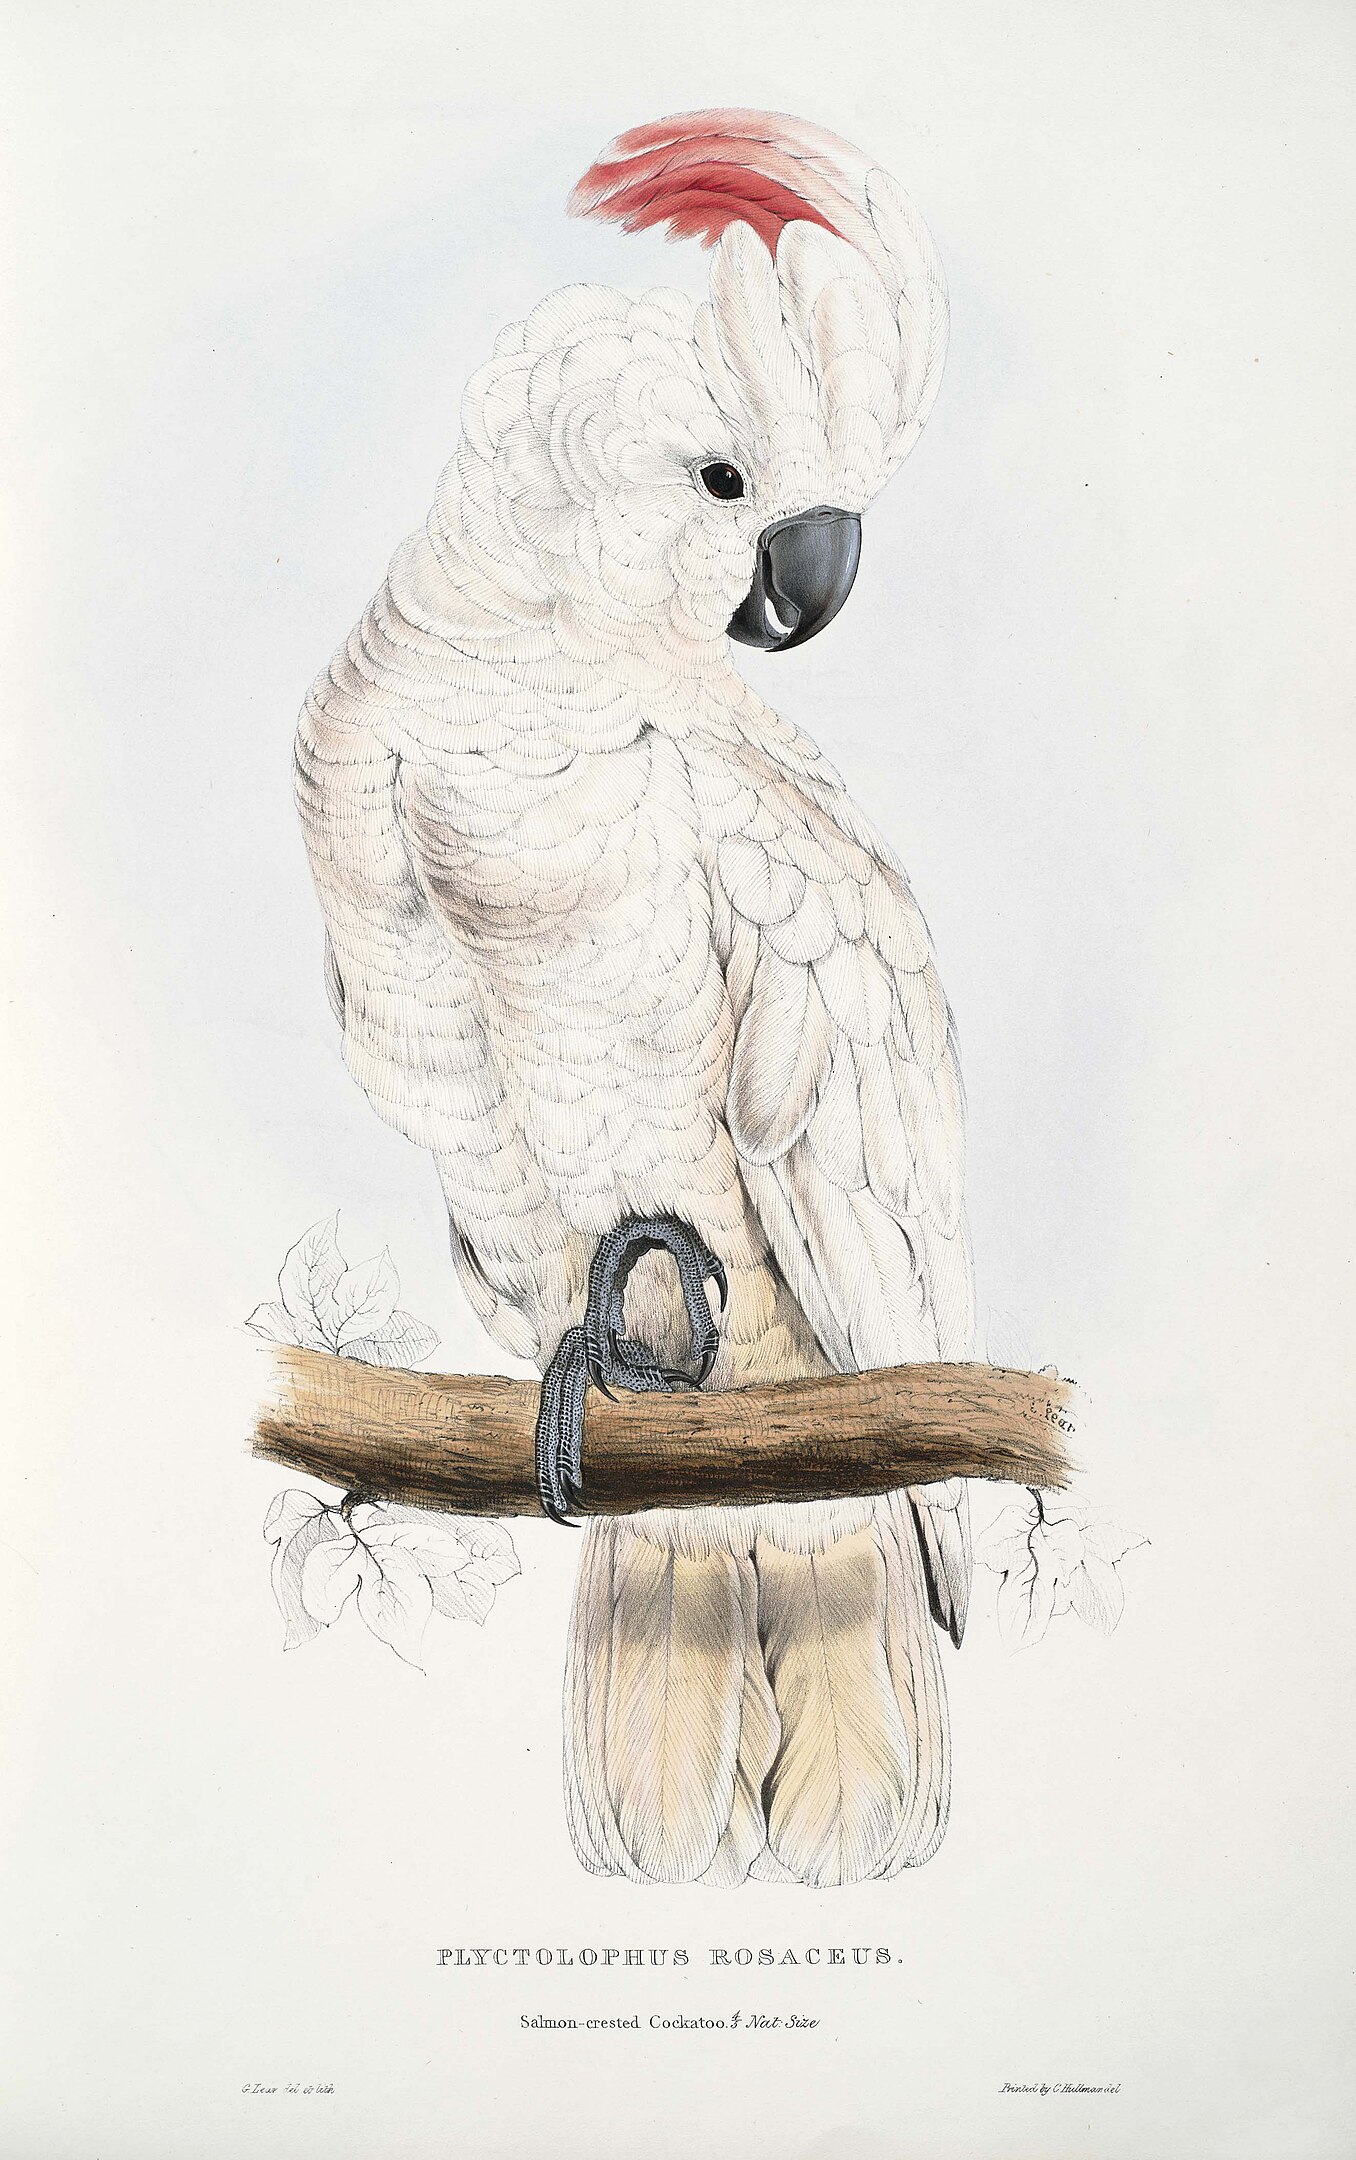 An illustration of a cockatoo